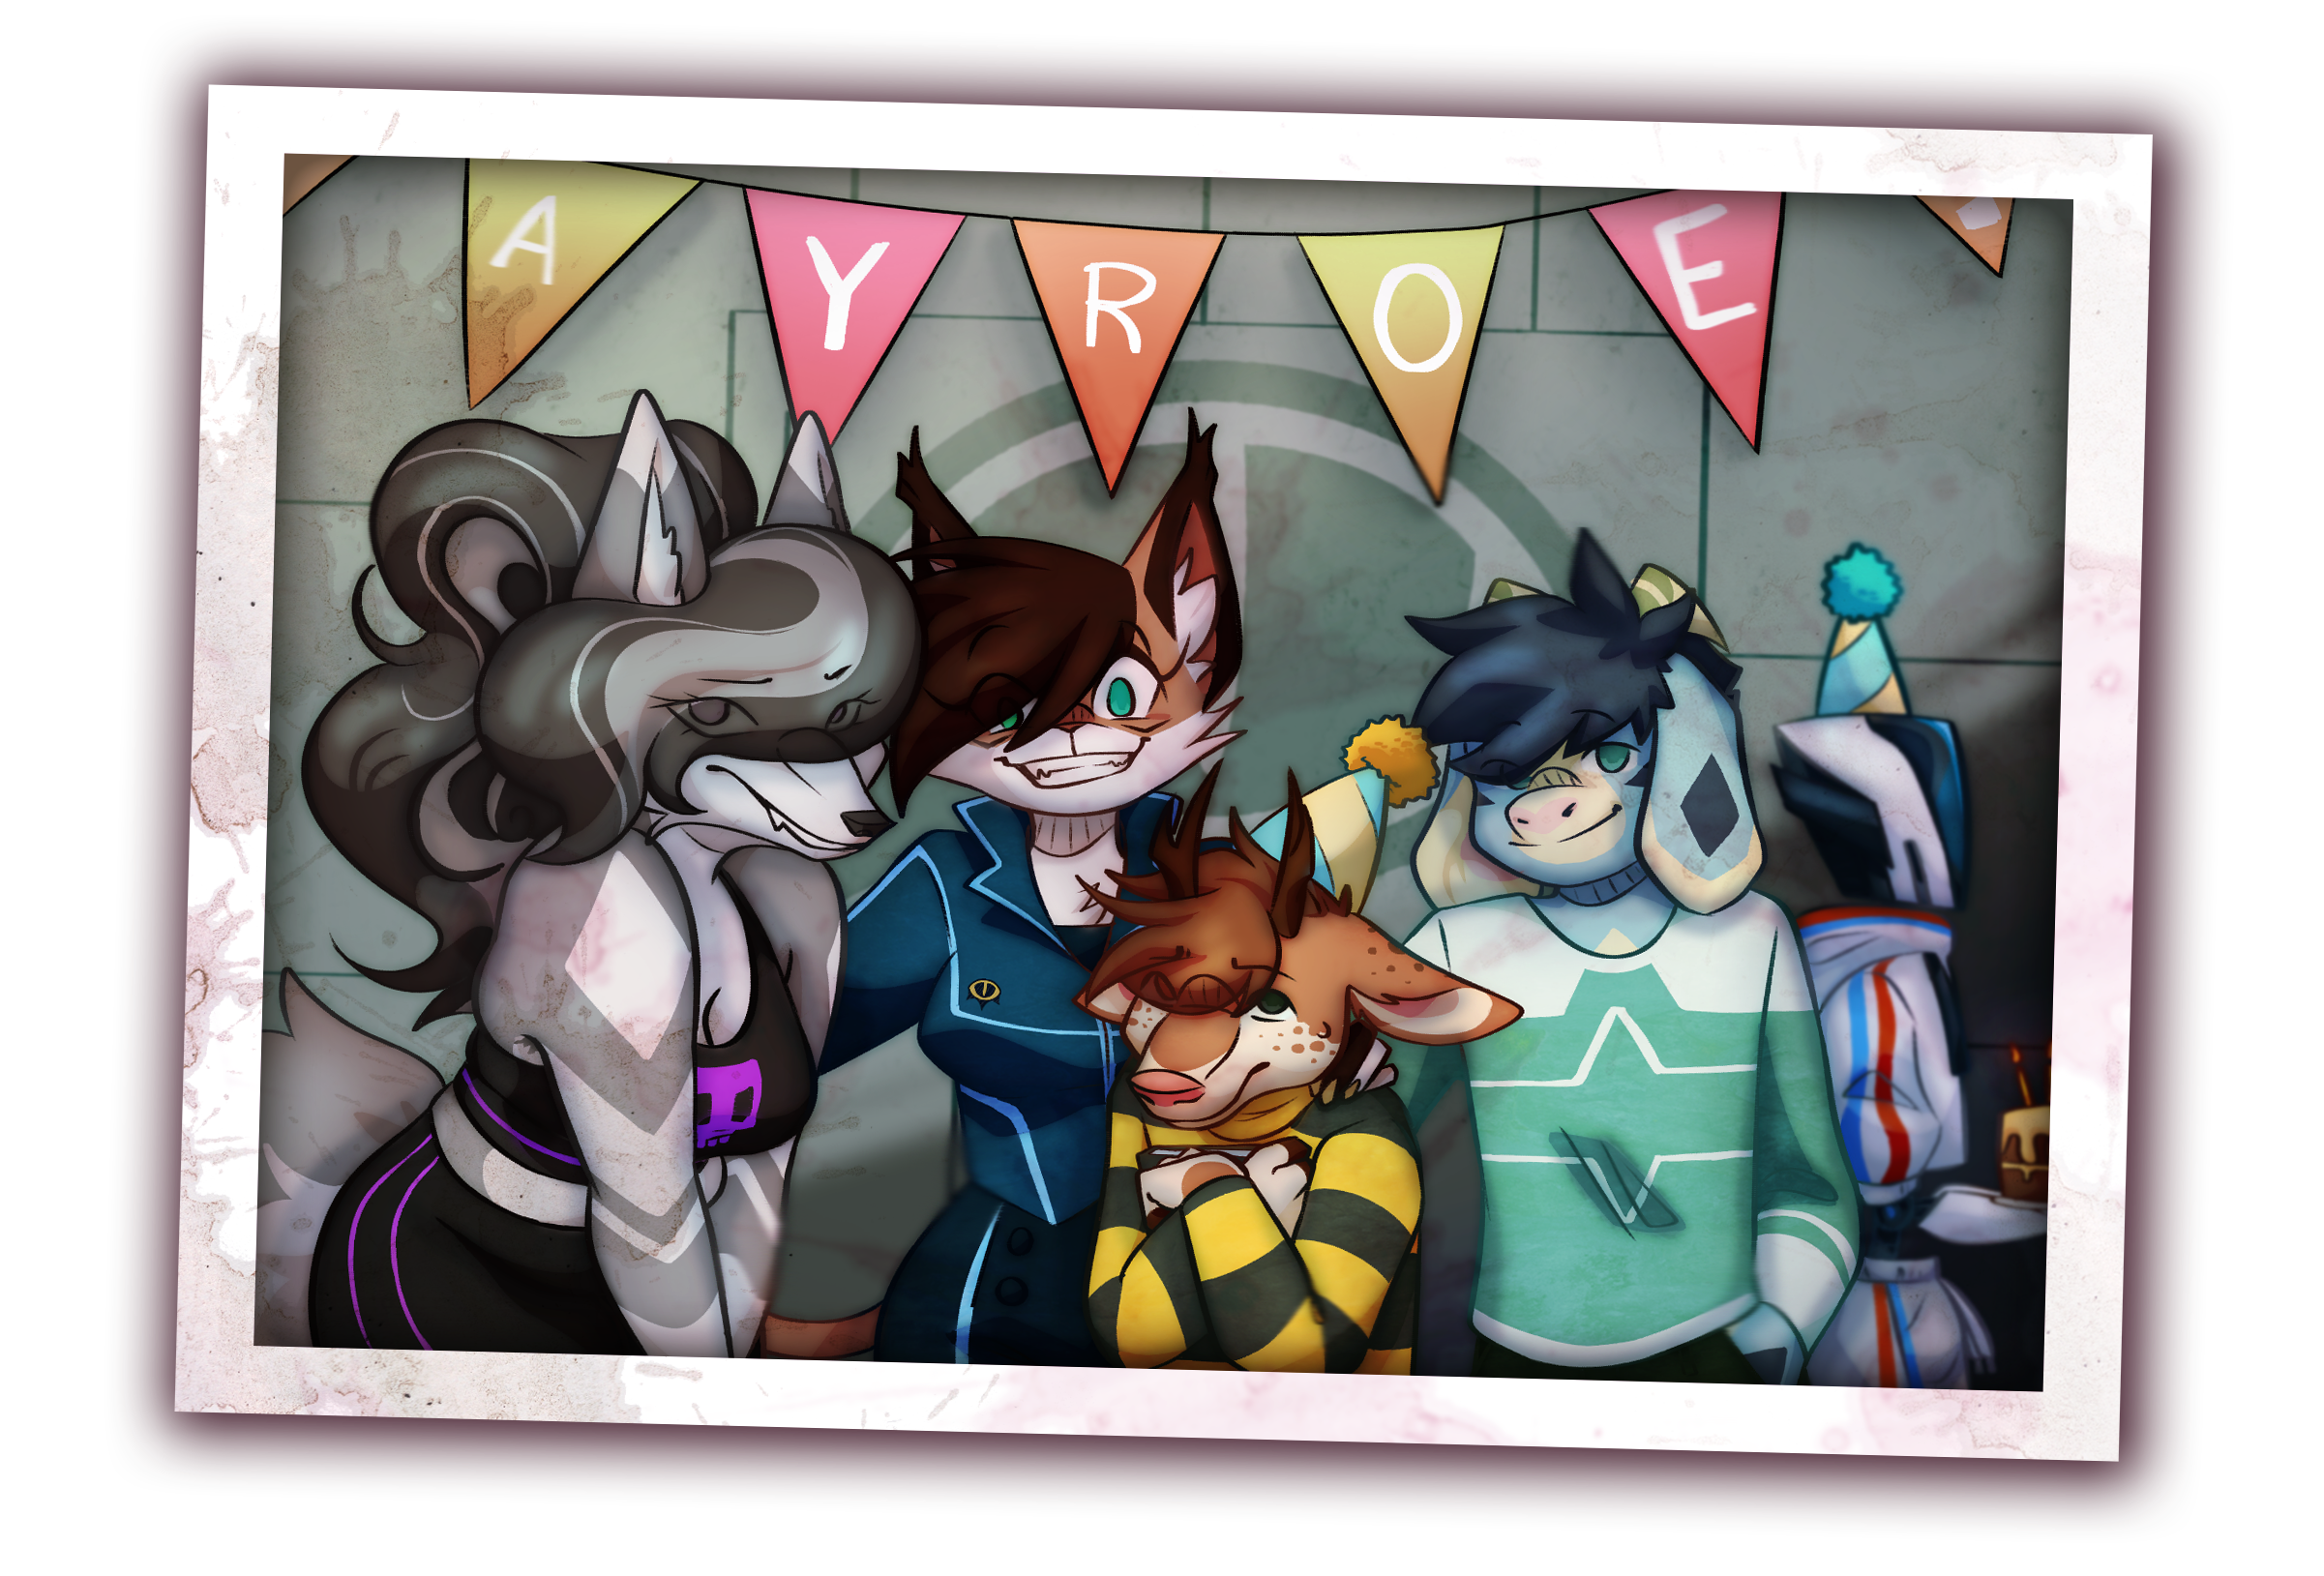 Candy, Phoebe, Roe, and Ari pose for Roe's birthday. KY32 walks in the background.
Art by @karmagicians